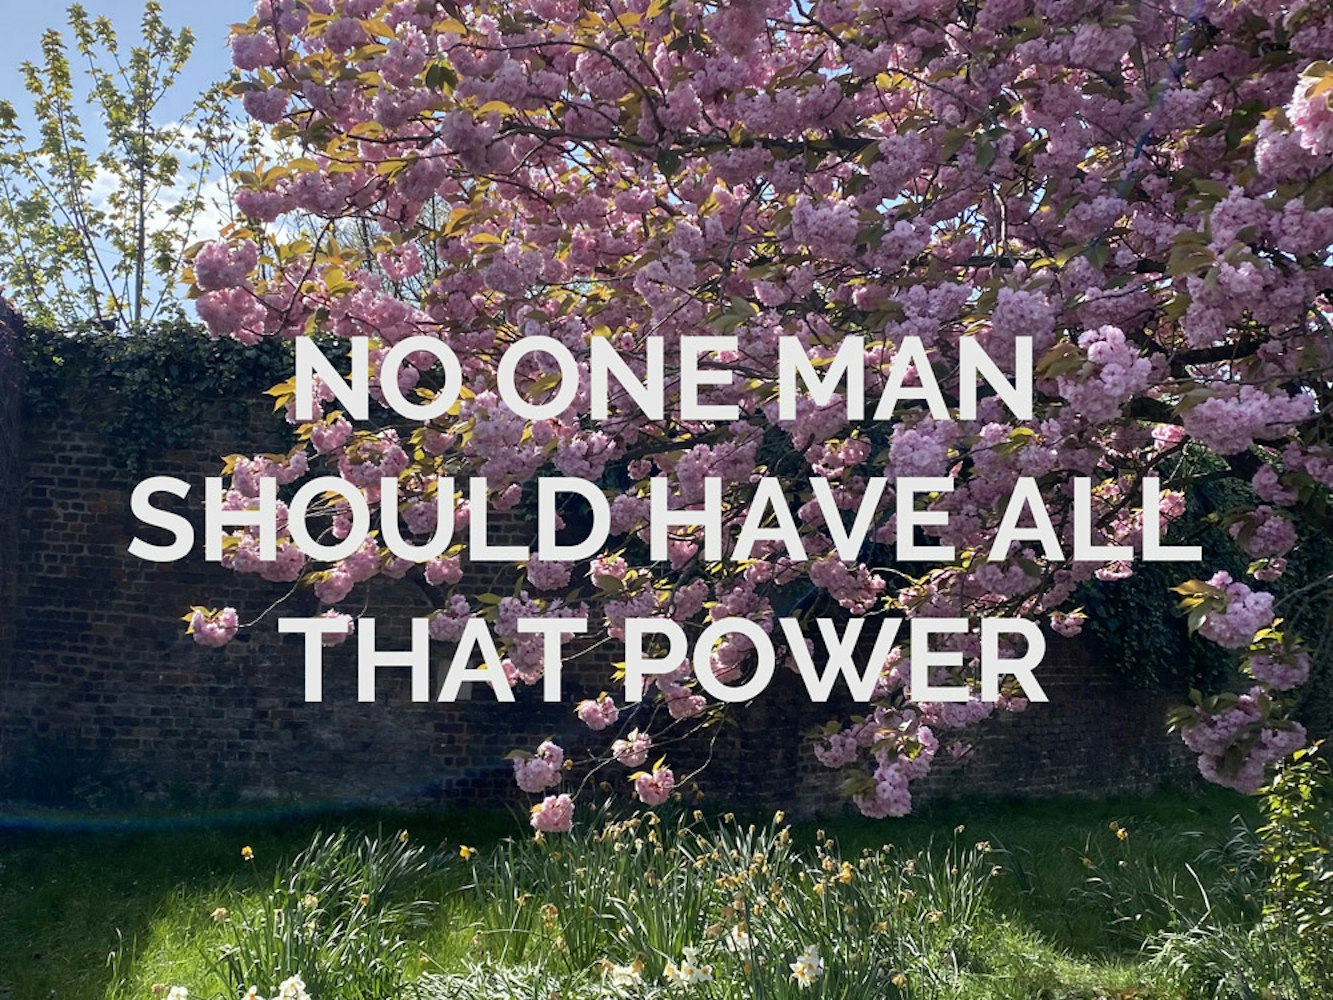 Cover Image for No one man should have all that power: Thoughts on the Guru 